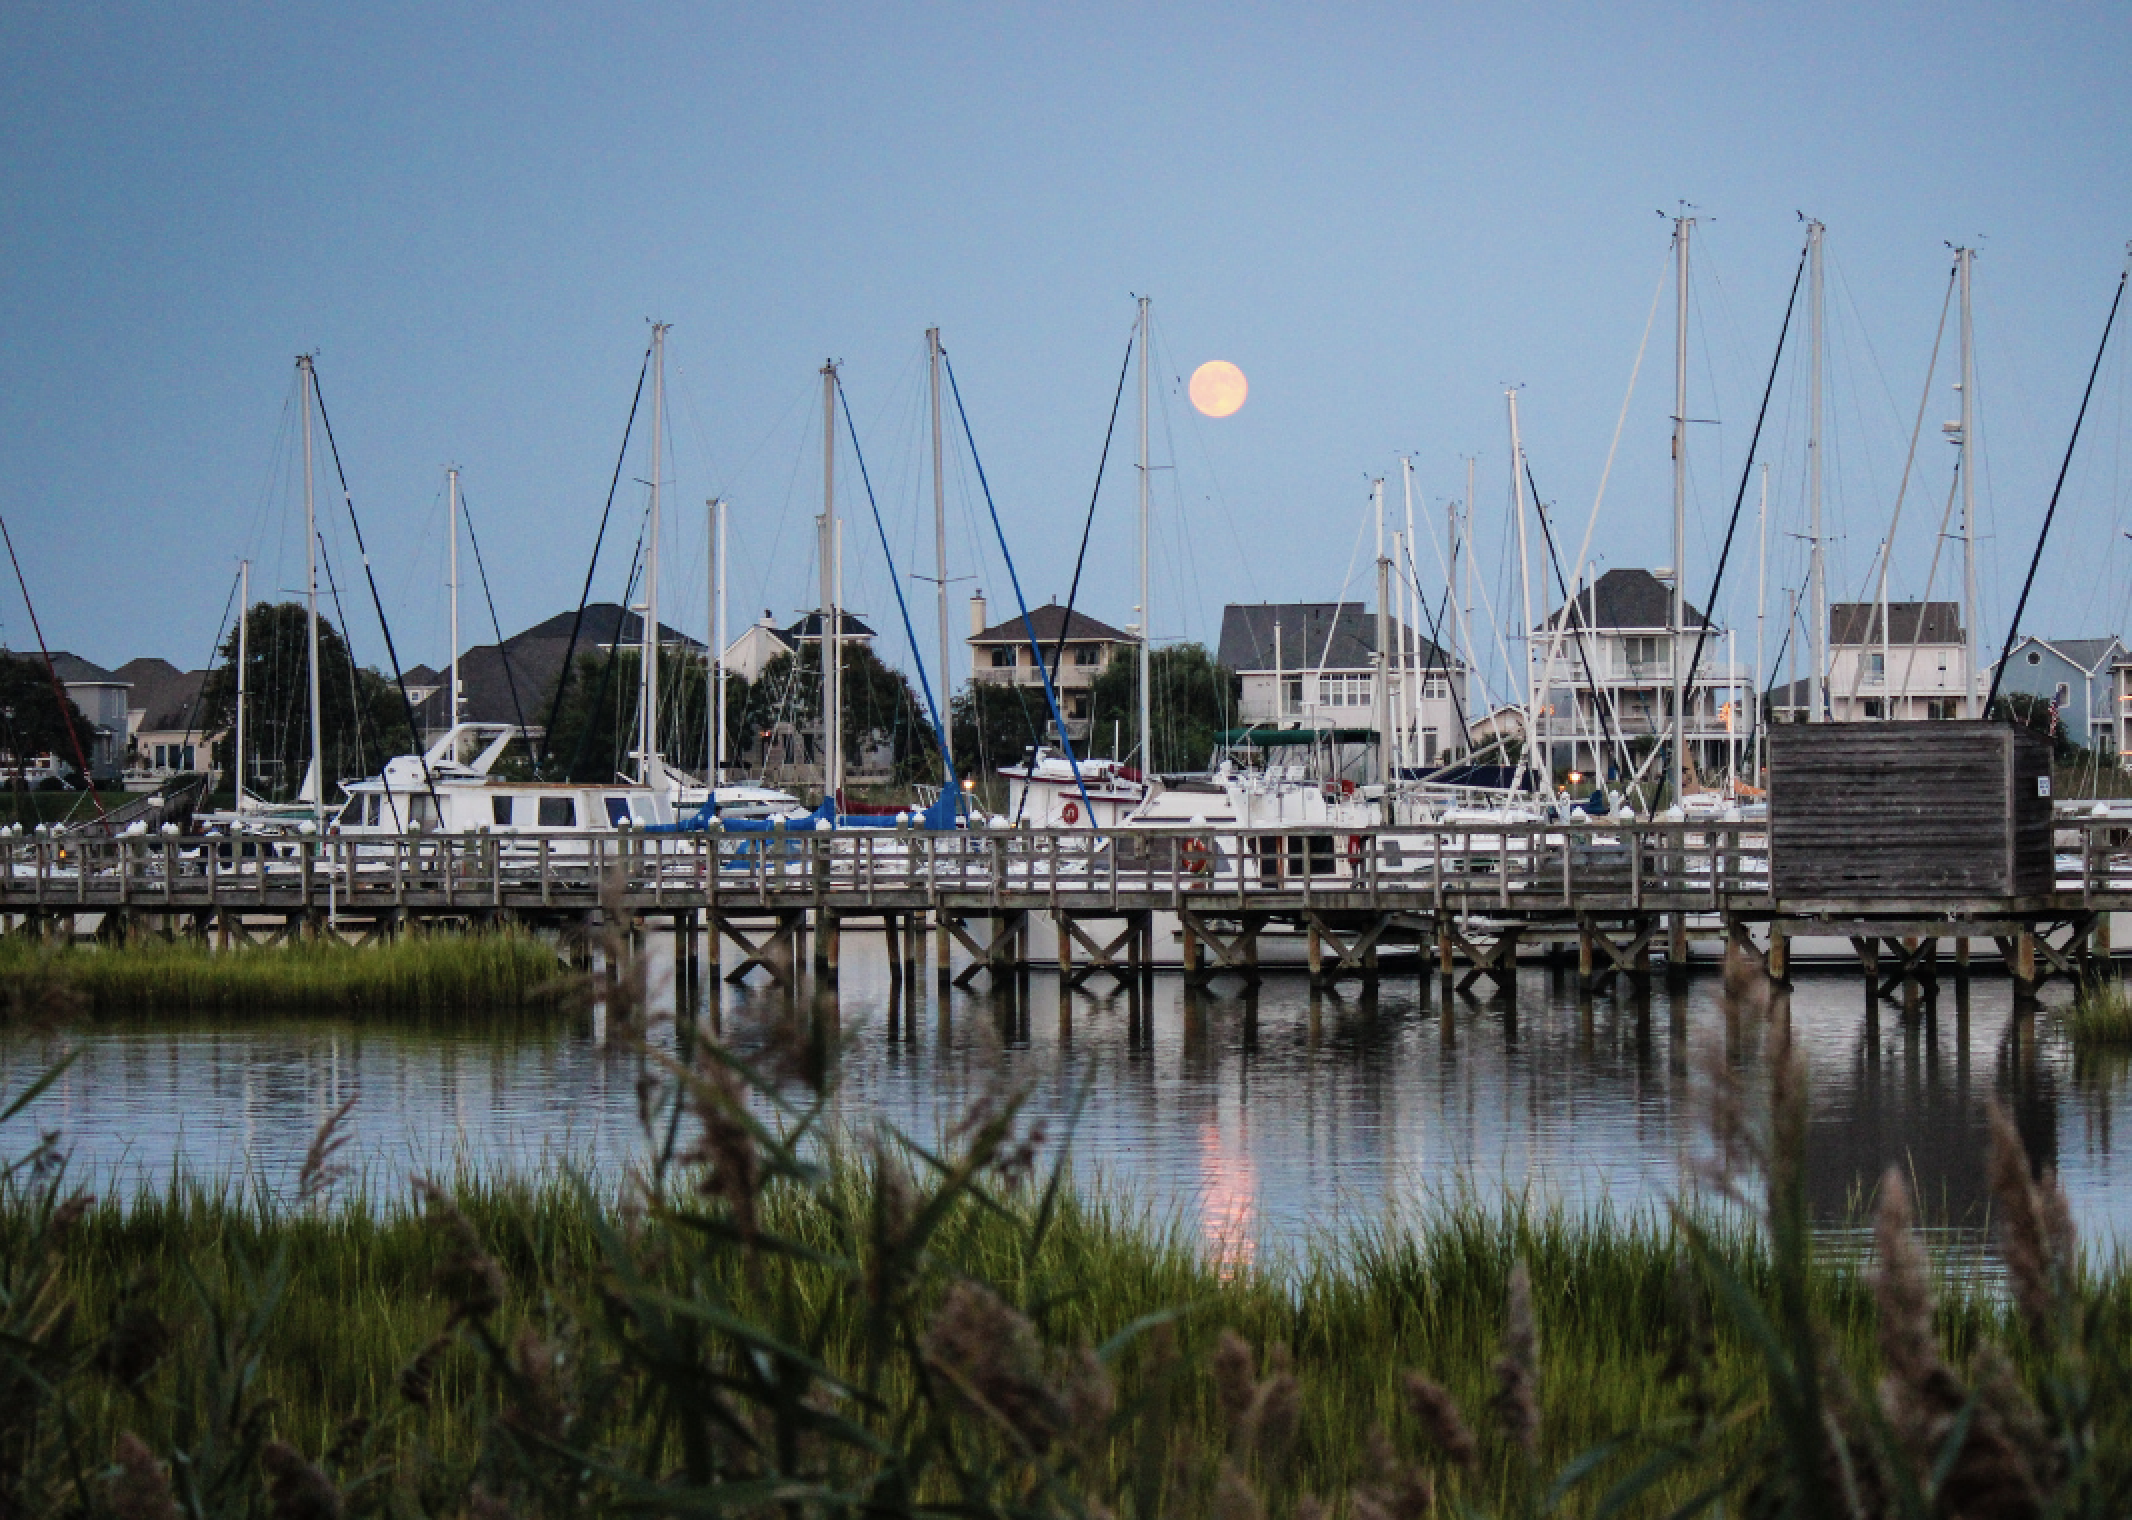 A full moon over boats in the harbor.